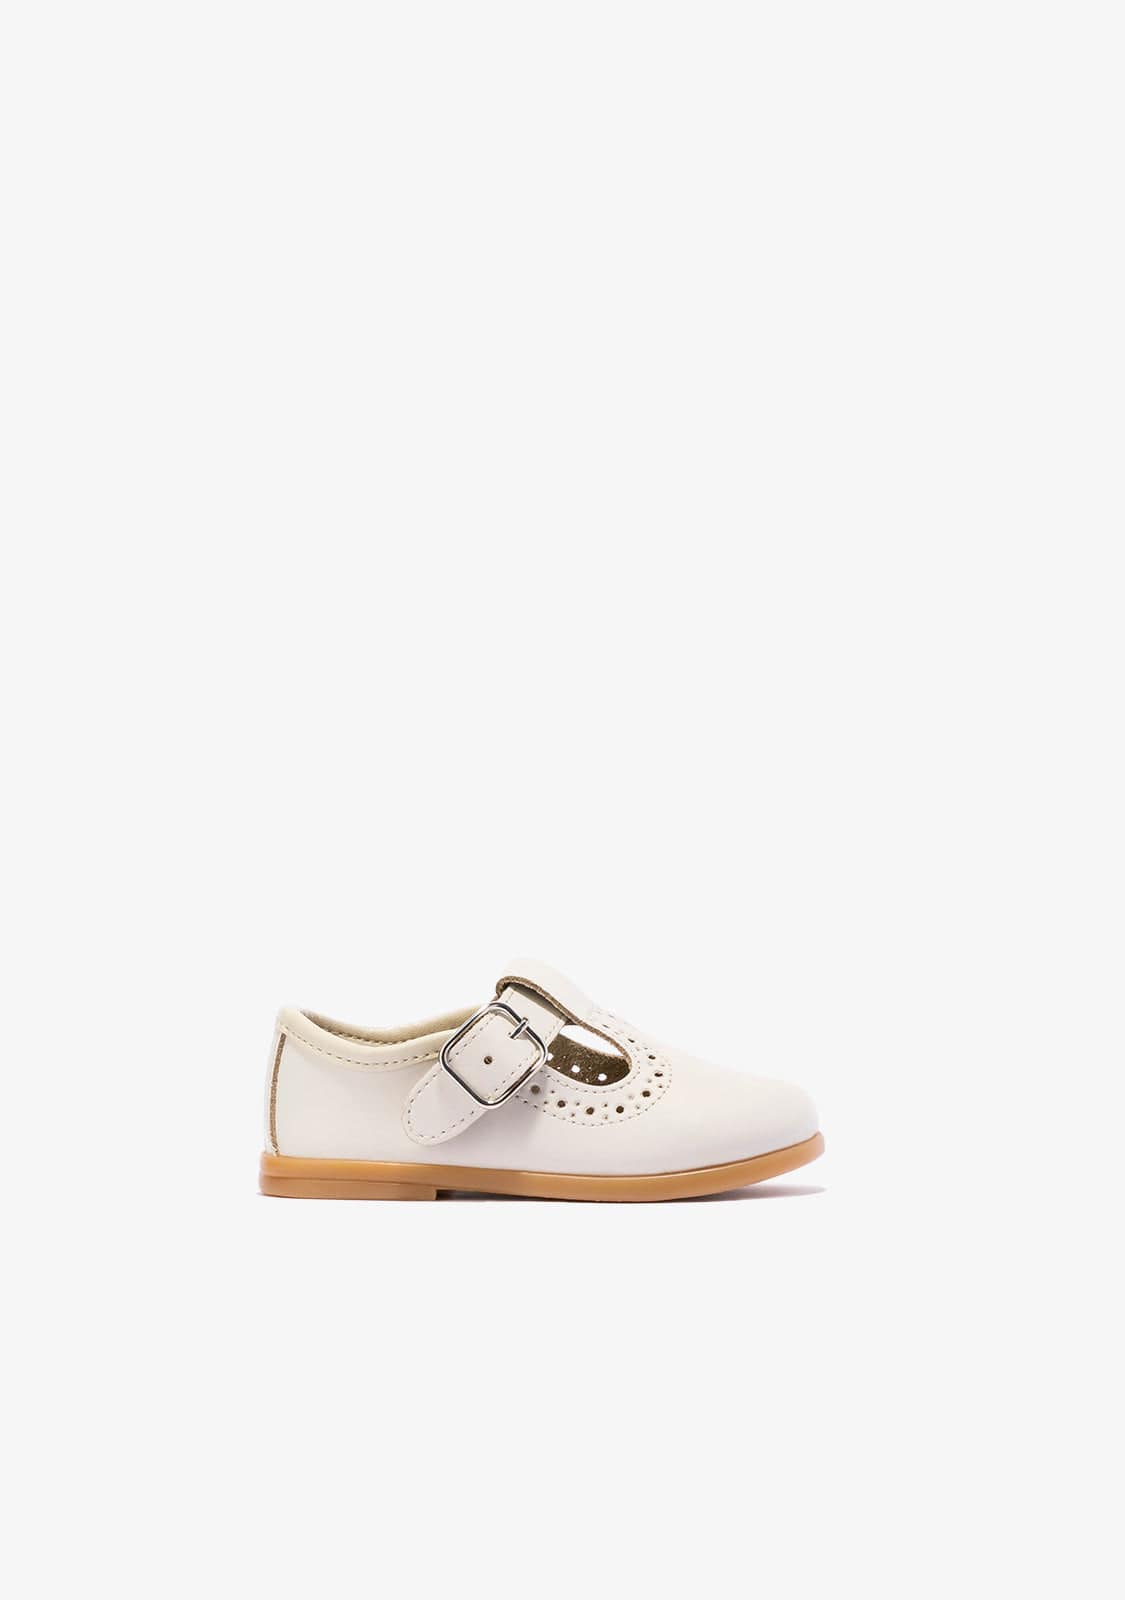 OSITO Shoes Baby's Beige Buckle Shoes Napa